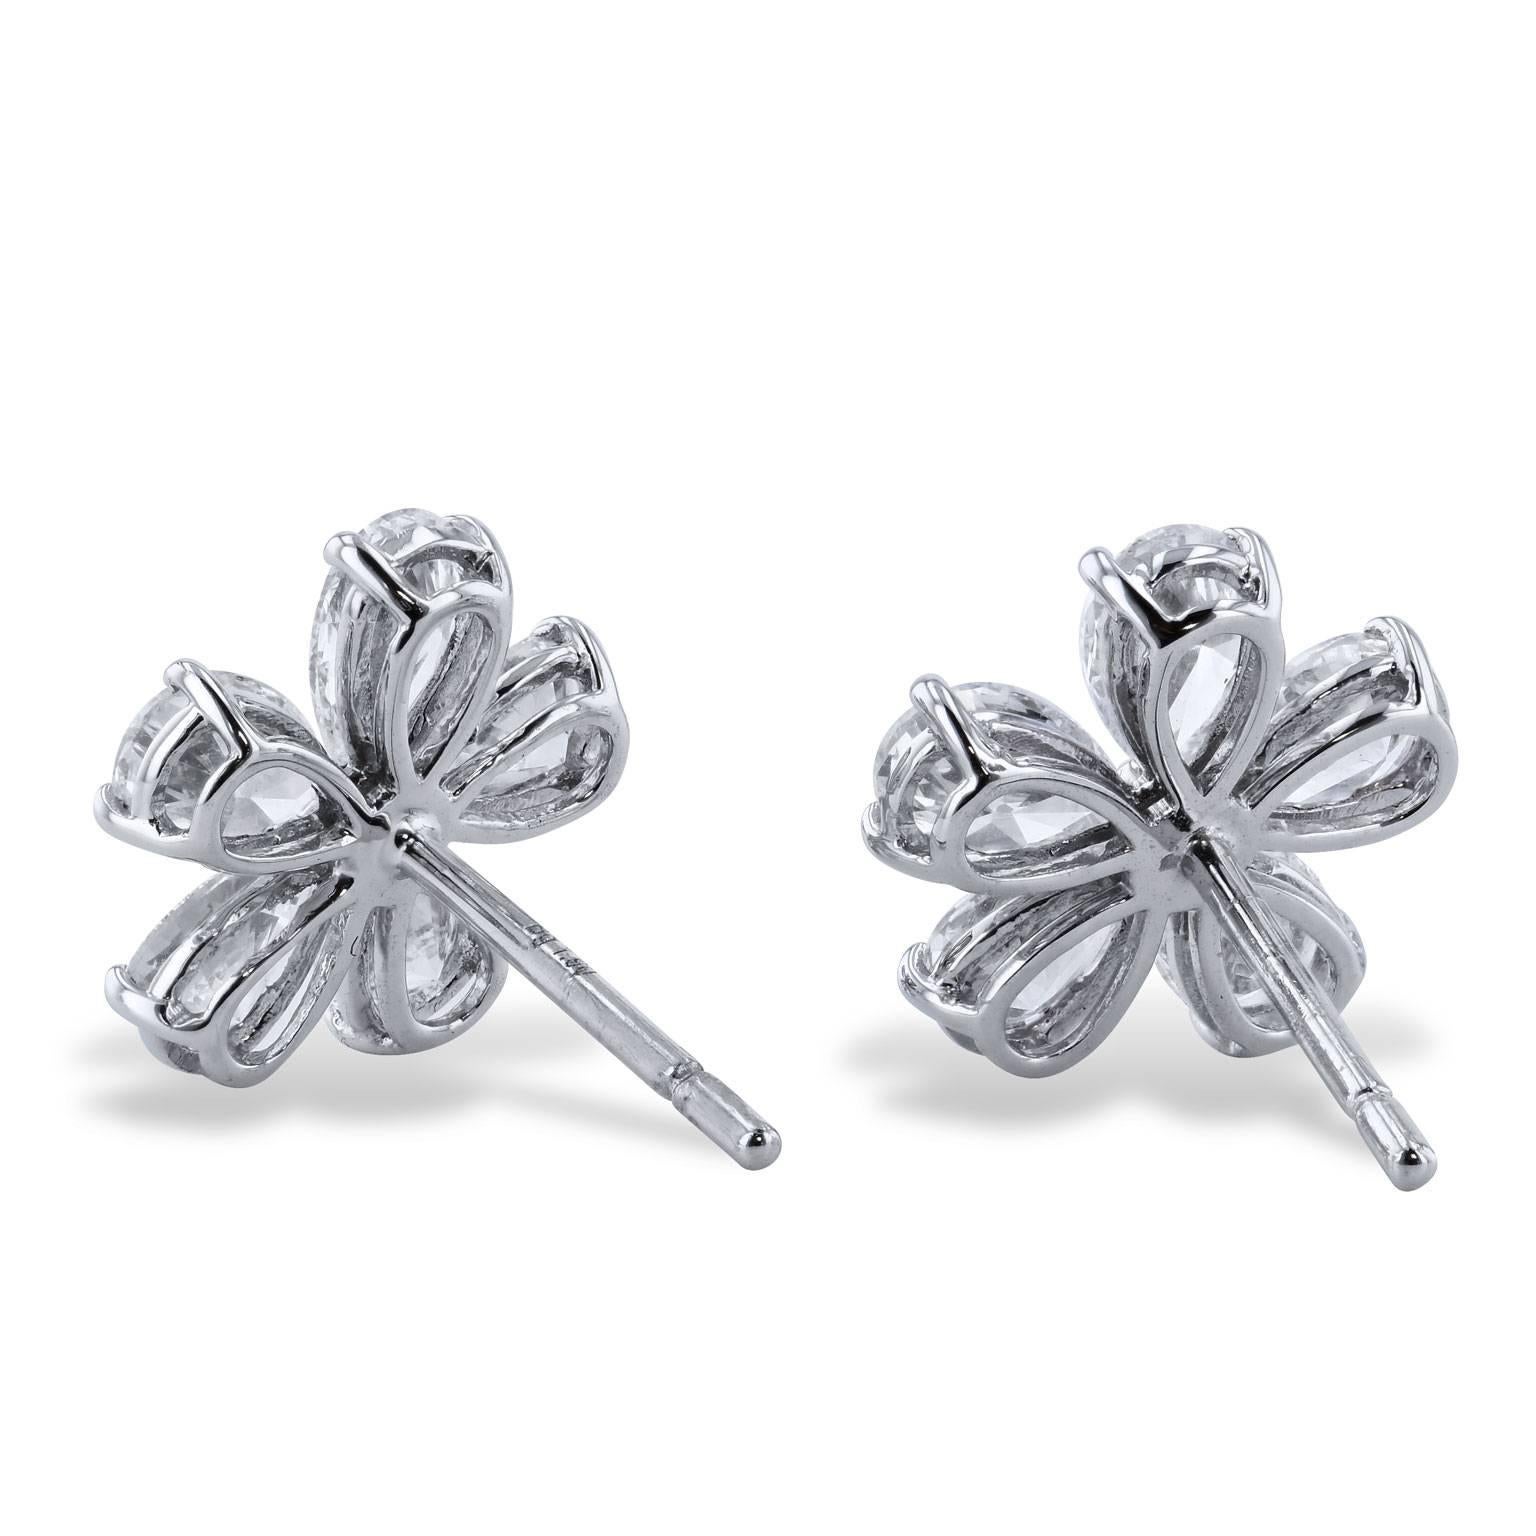 18 karat white gold flower stud earrings featuring a total weight of 1.90 carat of pear diamonds in flower shape (F/SI1).